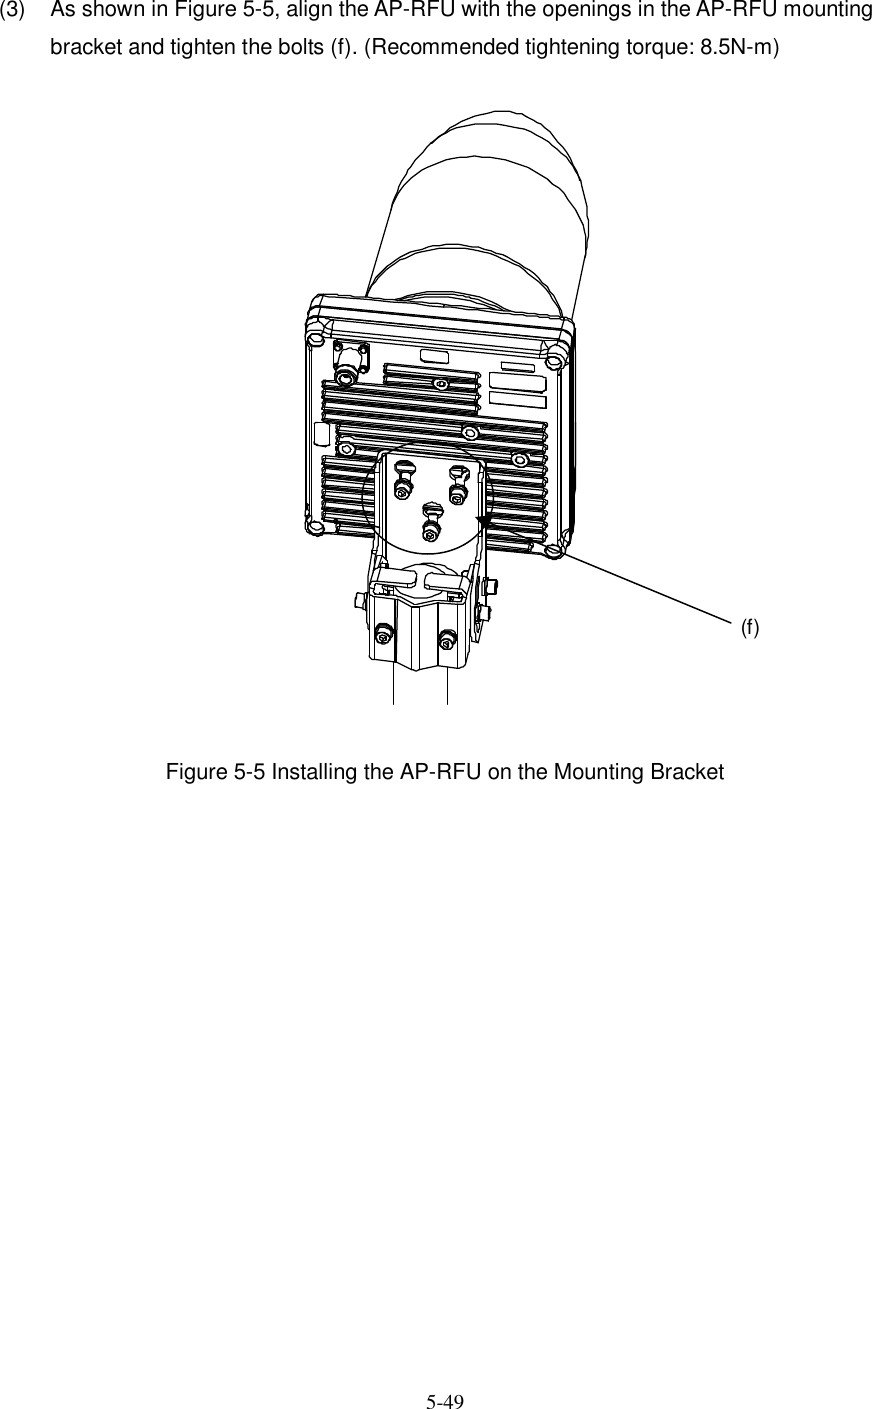   5-49    (3)  As shown in Figure 5-5, align the AP-RFU with the openings in the AP-RFU mounting bracket and tighten the bolts (f). (Recommended tightening torque: 8.5N-m)  Figure 5-5 Installing the AP-RFU on the Mounting Bracket                (f) 